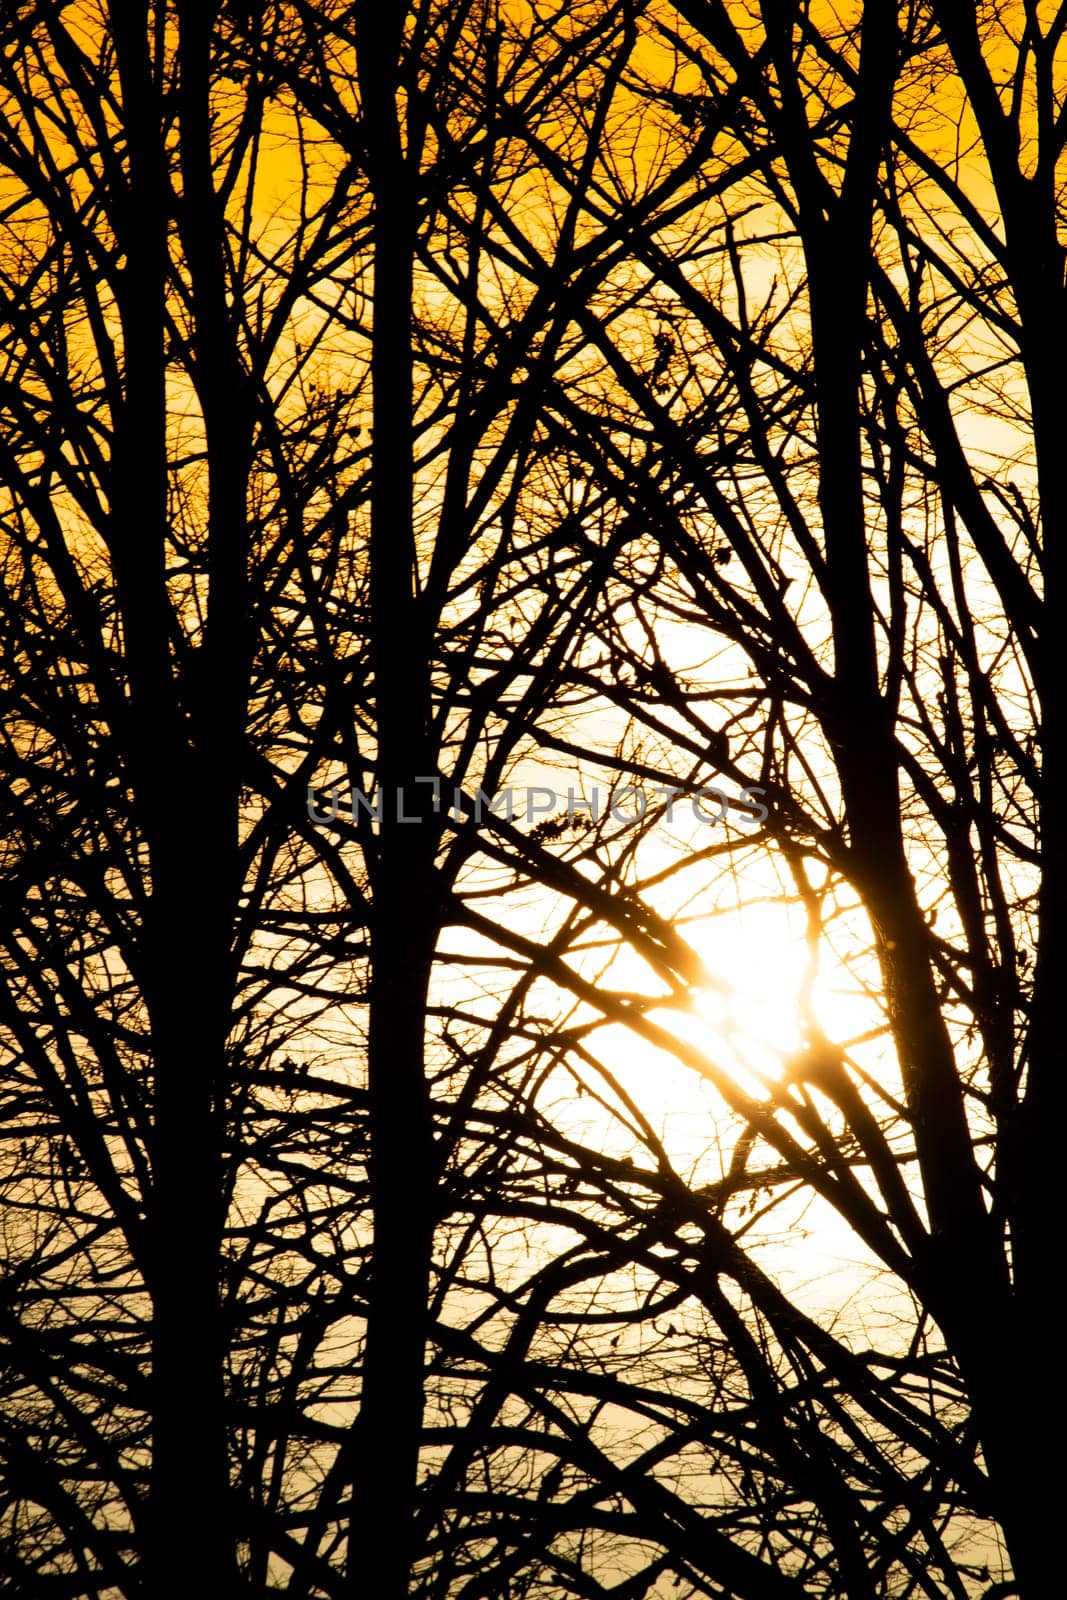 Photographic documentation of the moment of sunset through the branches of the trees 